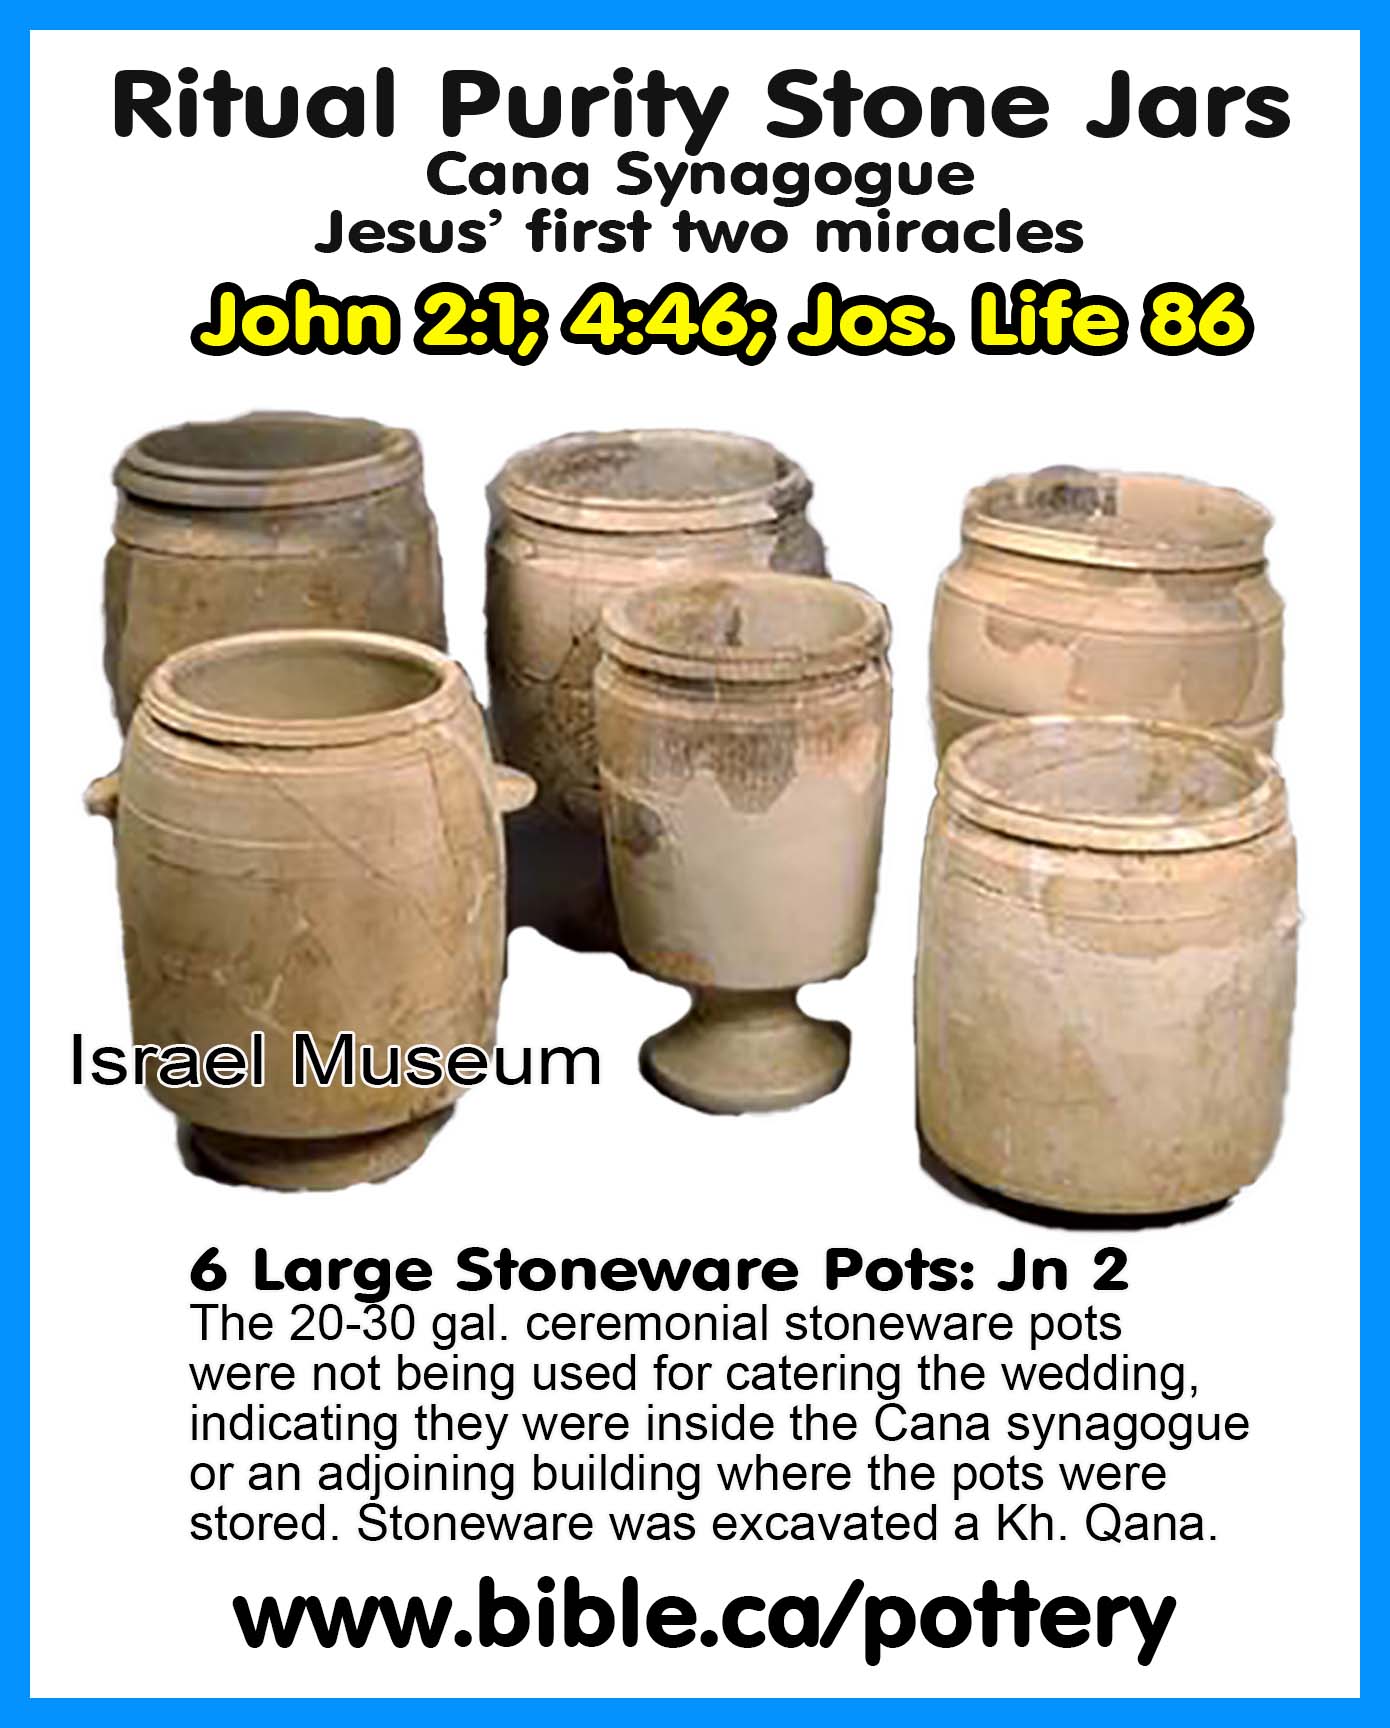 Hot Water Urns - The Federation of Synagogues